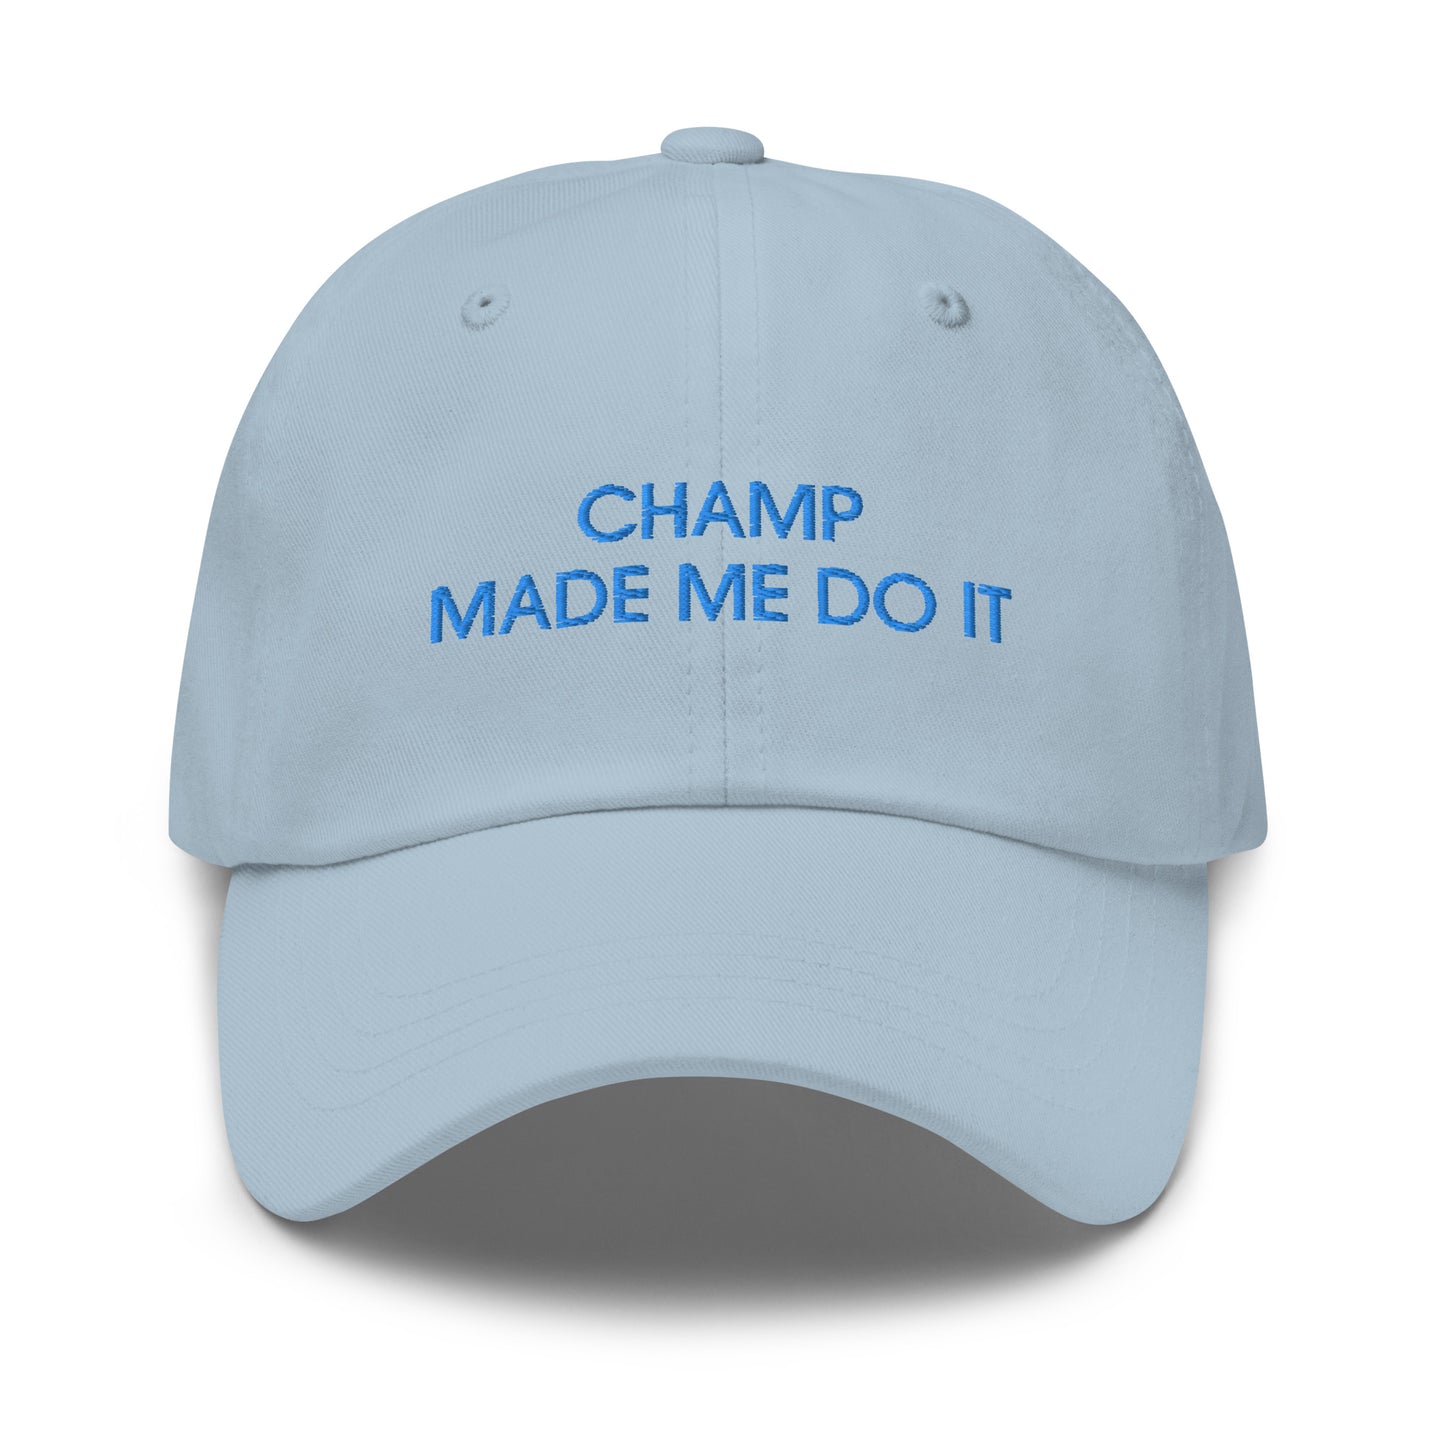  champ made me do It dad hat